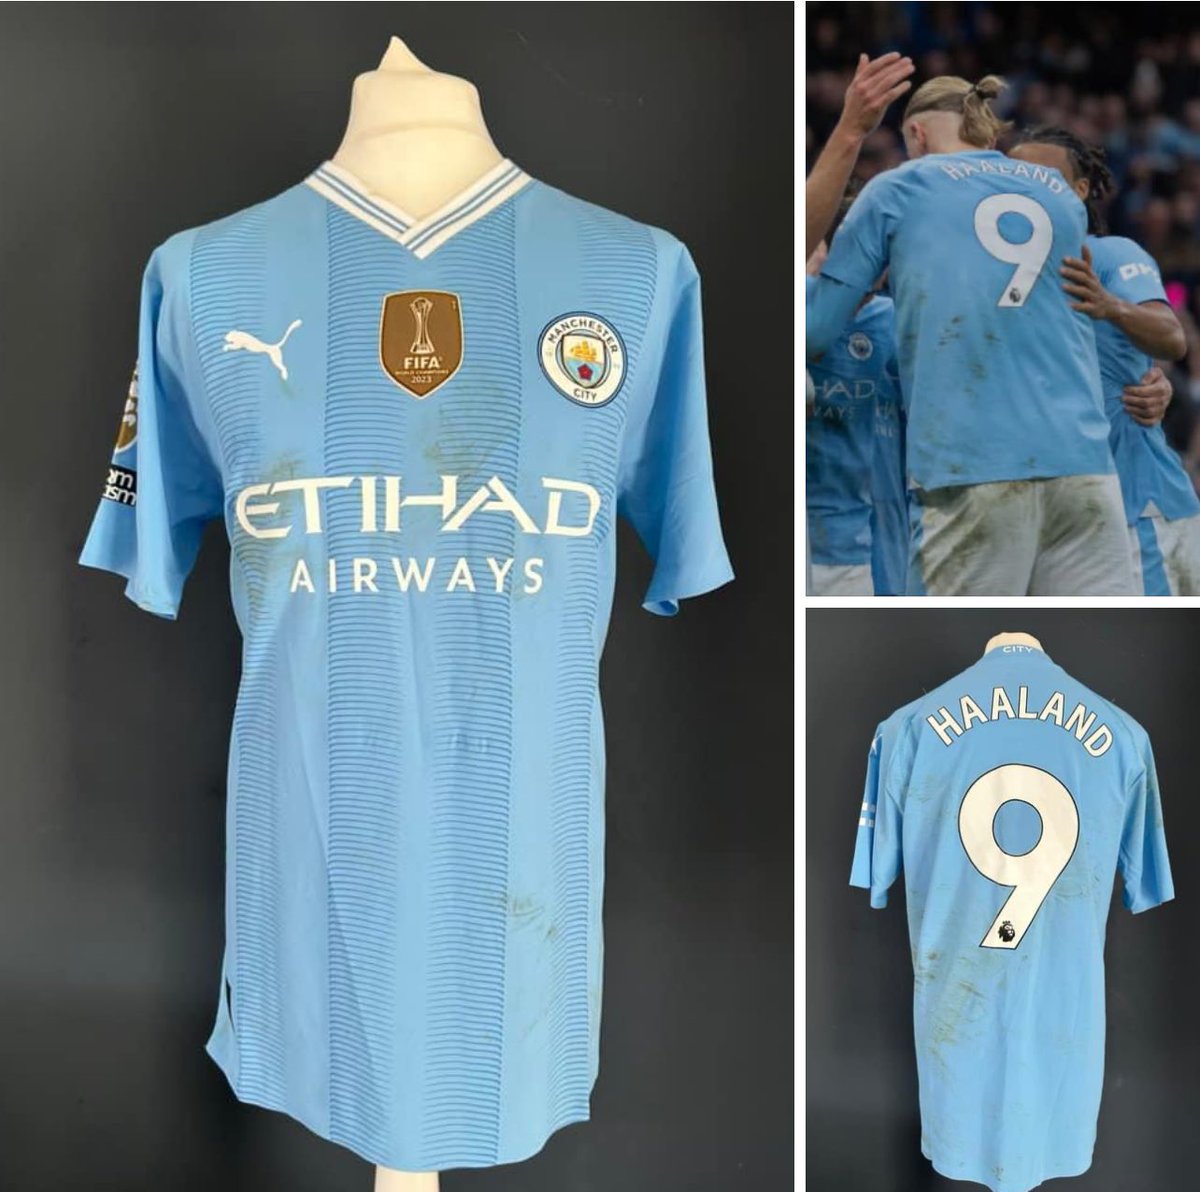 NEW ADDITION: 2023/24 Premier League Erling Haaland unwashed match worn shirt v Manchester United on Sunday 3rd March 2024.